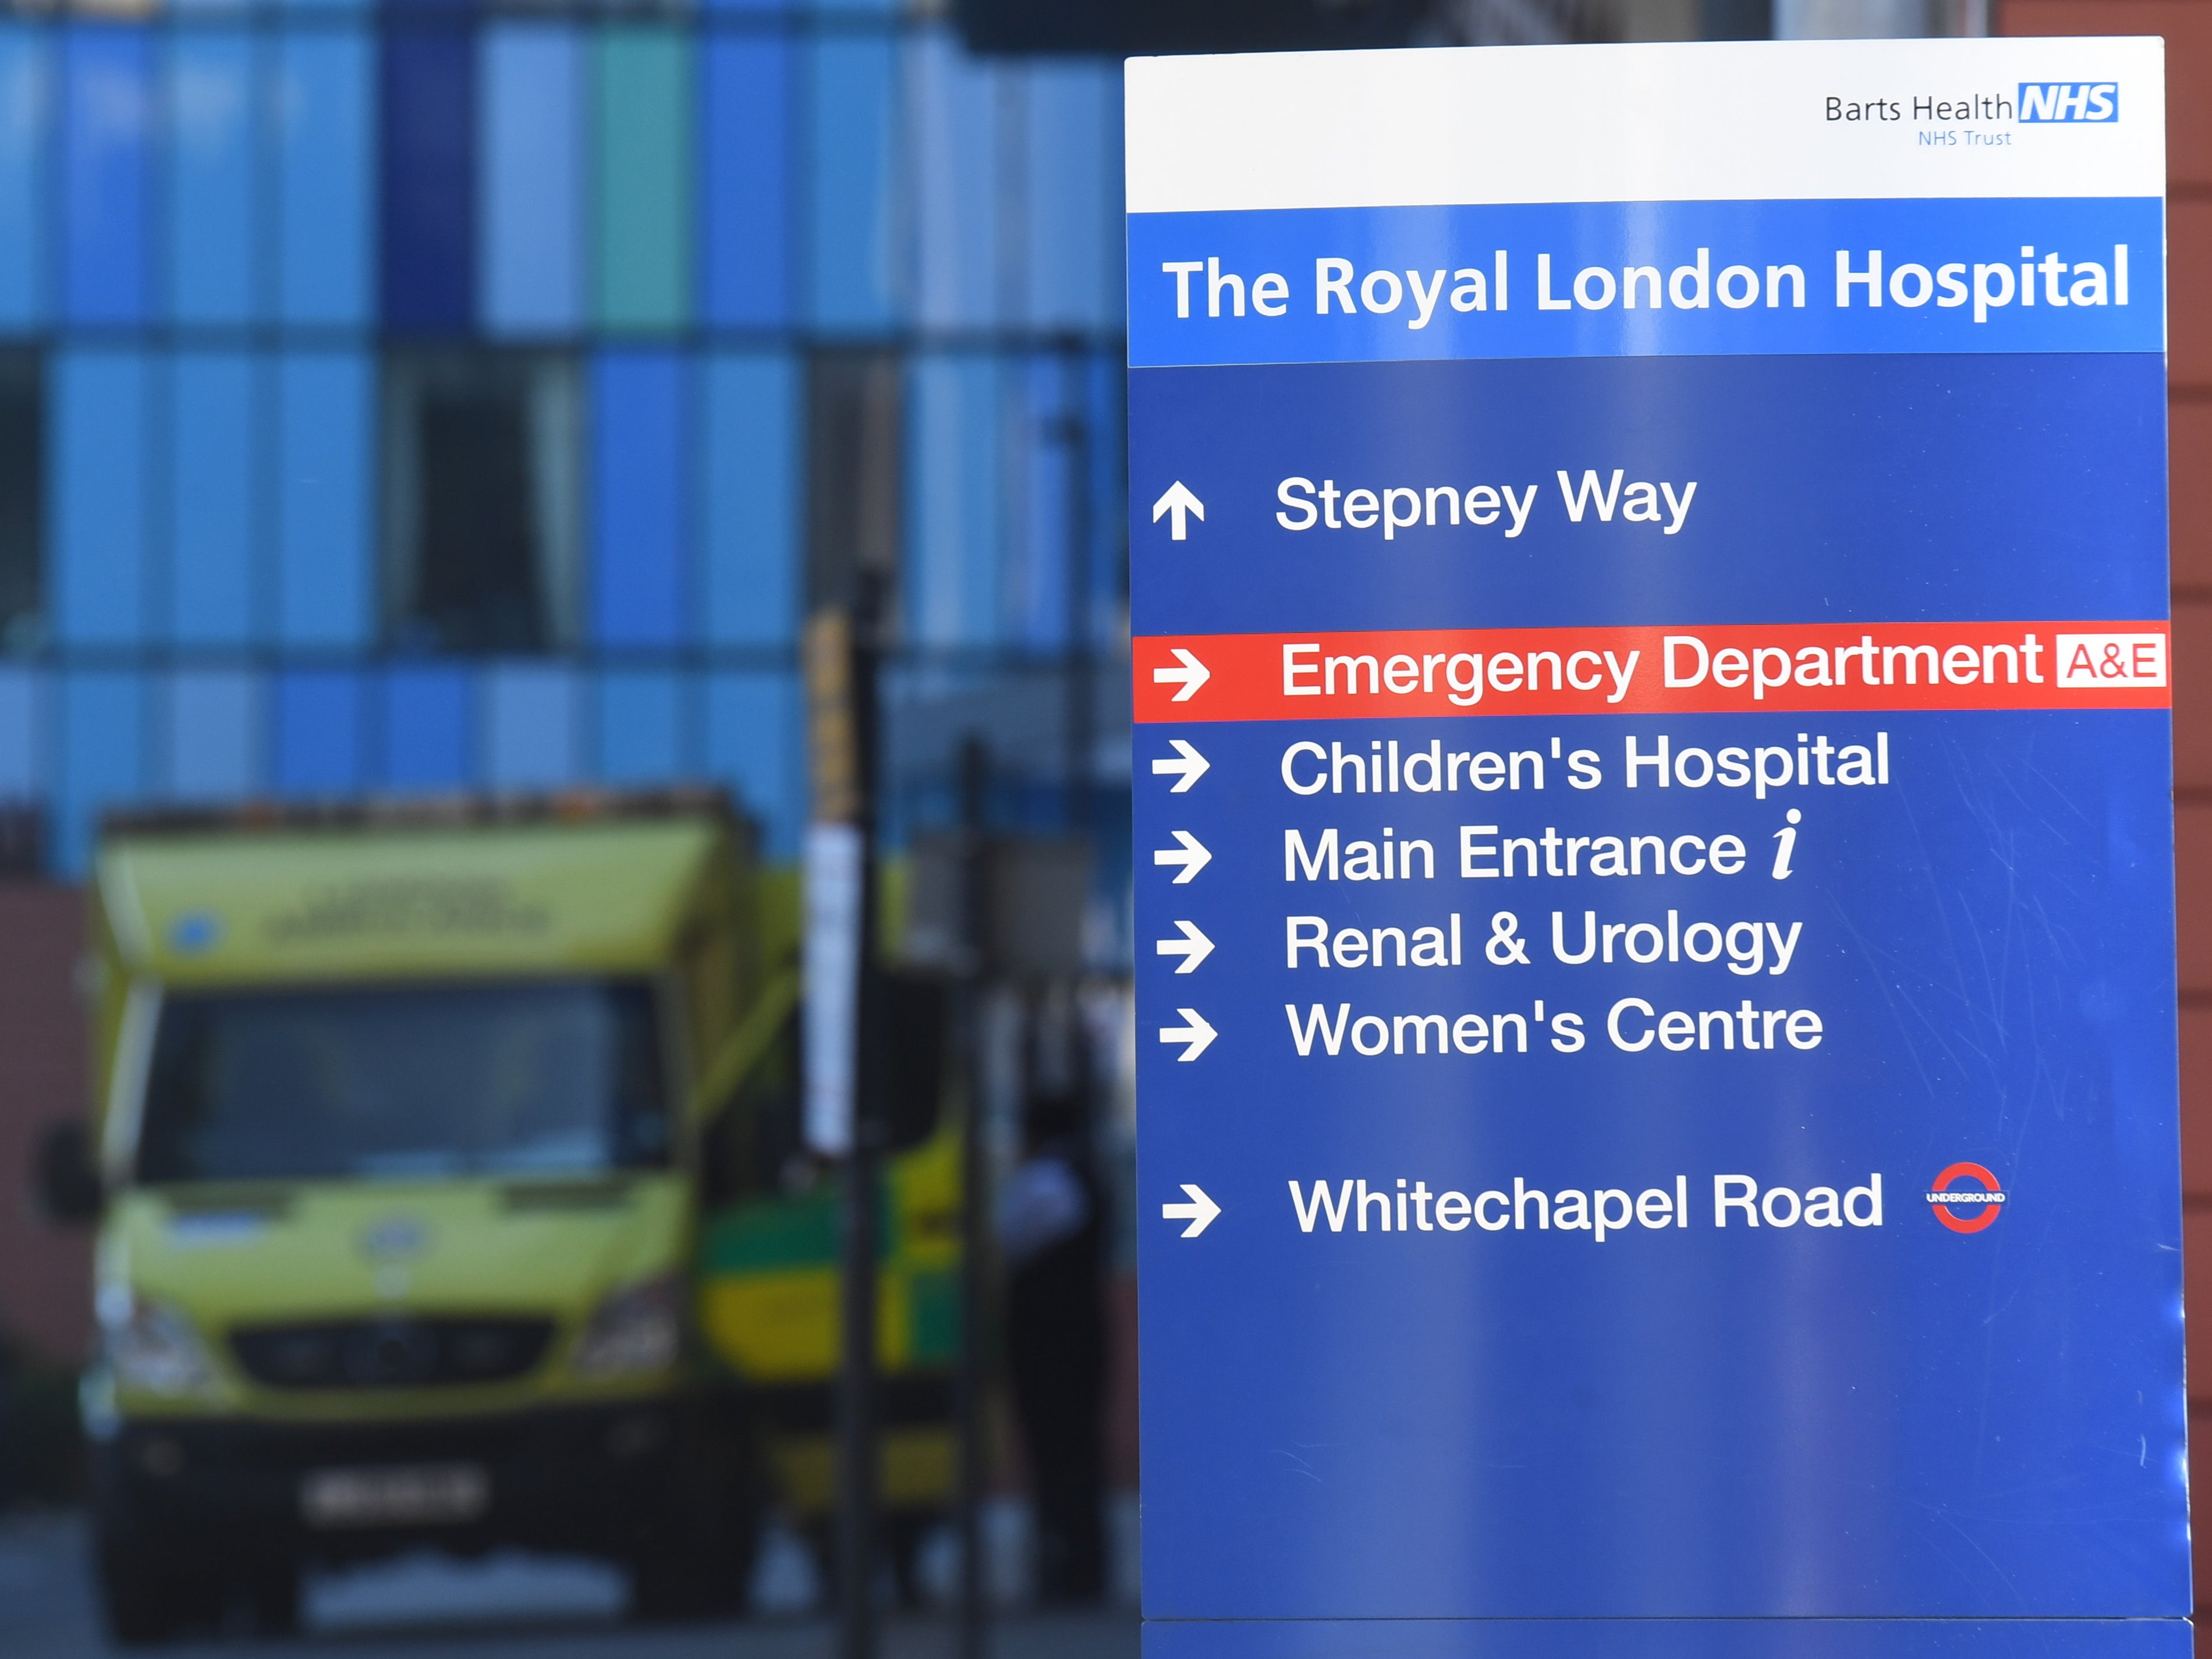 The Royal London hospital has had to cancel operations and redeploy staff as coronavirus cases surge